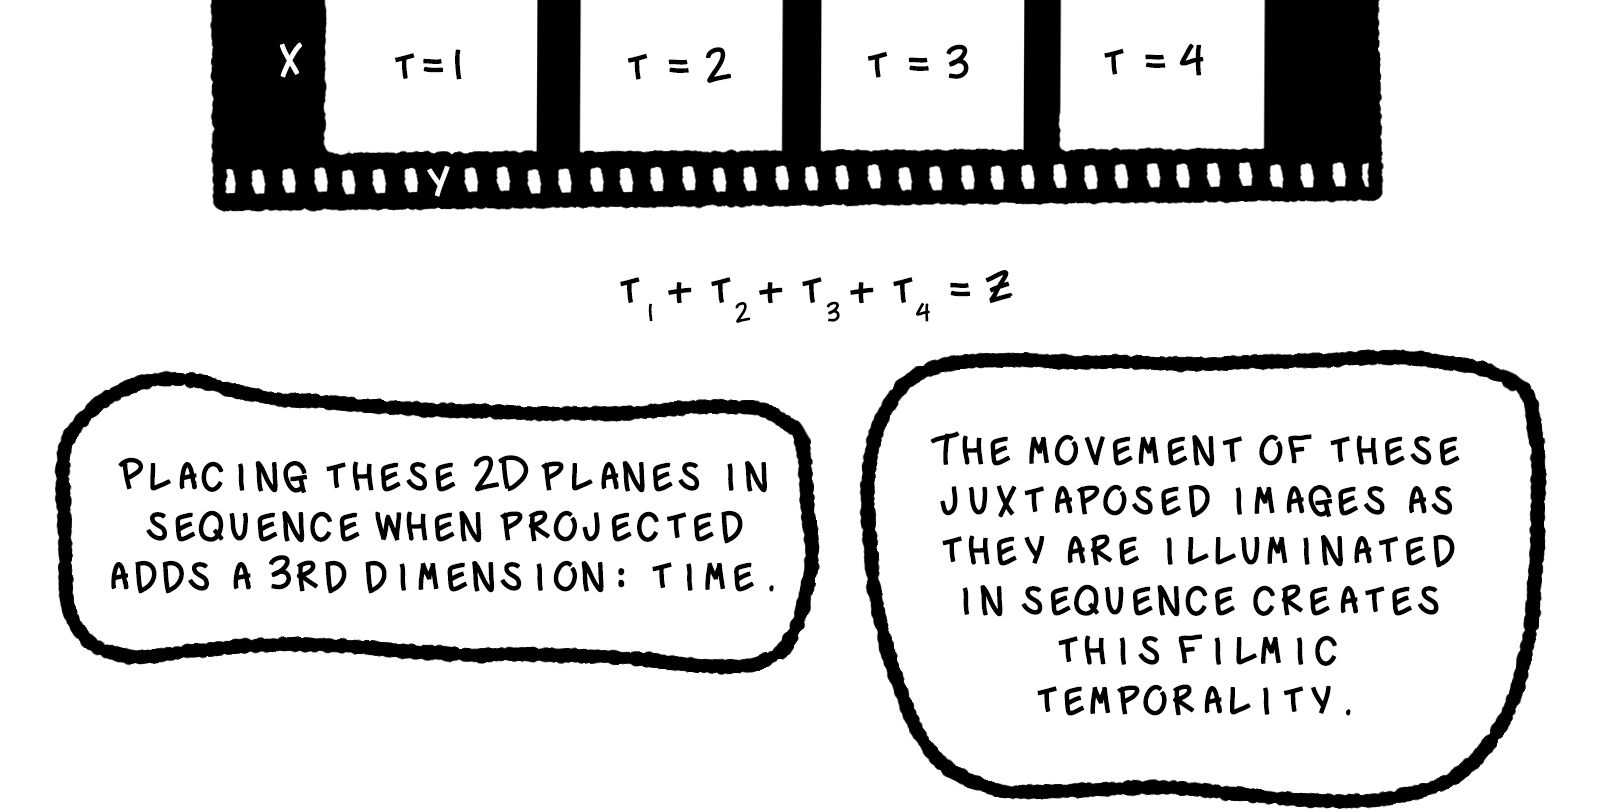 Another bubble appears, reading: The film strip uses this same strategy to superimpose a four-dimensional experience. Again, pictured to the right of the bubble, we see a rectangle with x (height) and y (length) marked, with the whole rectangle designated as 1 frame. Next we see a film strip. Each frame is labelled with x and y on their respective axes. There are four frames pictured, the first labelled t=1, the next t=2, and so on. Below the film strip, it reads T1+T1+T3+T4=Z.